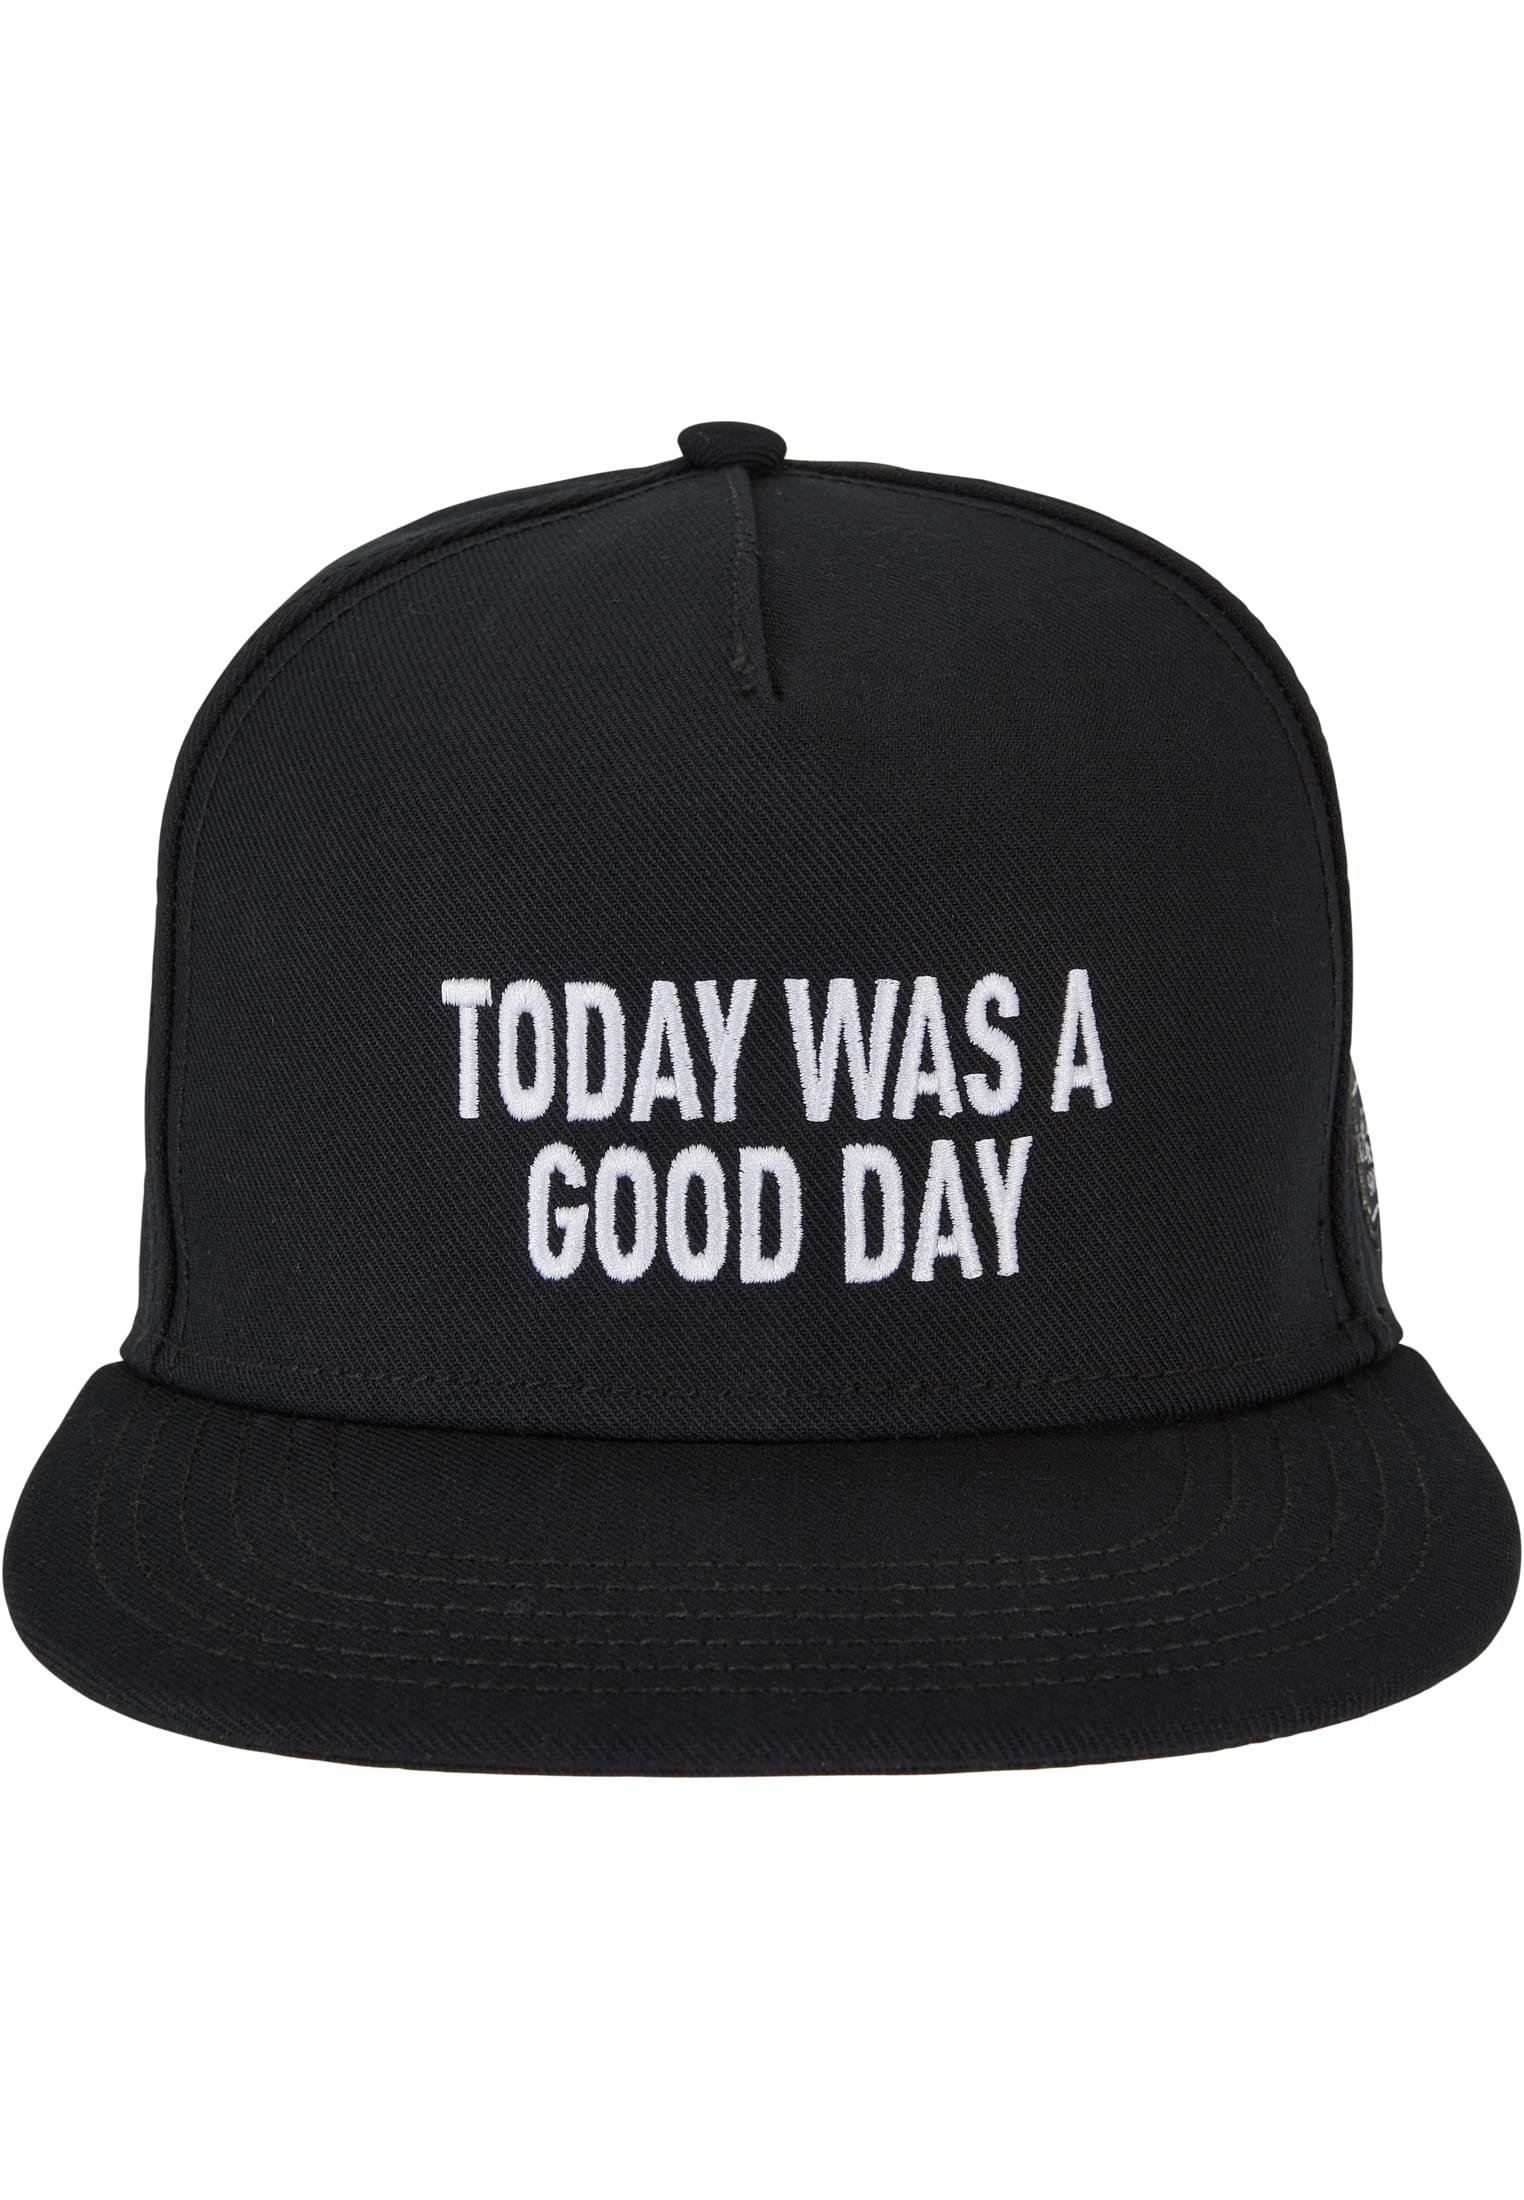 Today Was A Good Day P Cap black one size